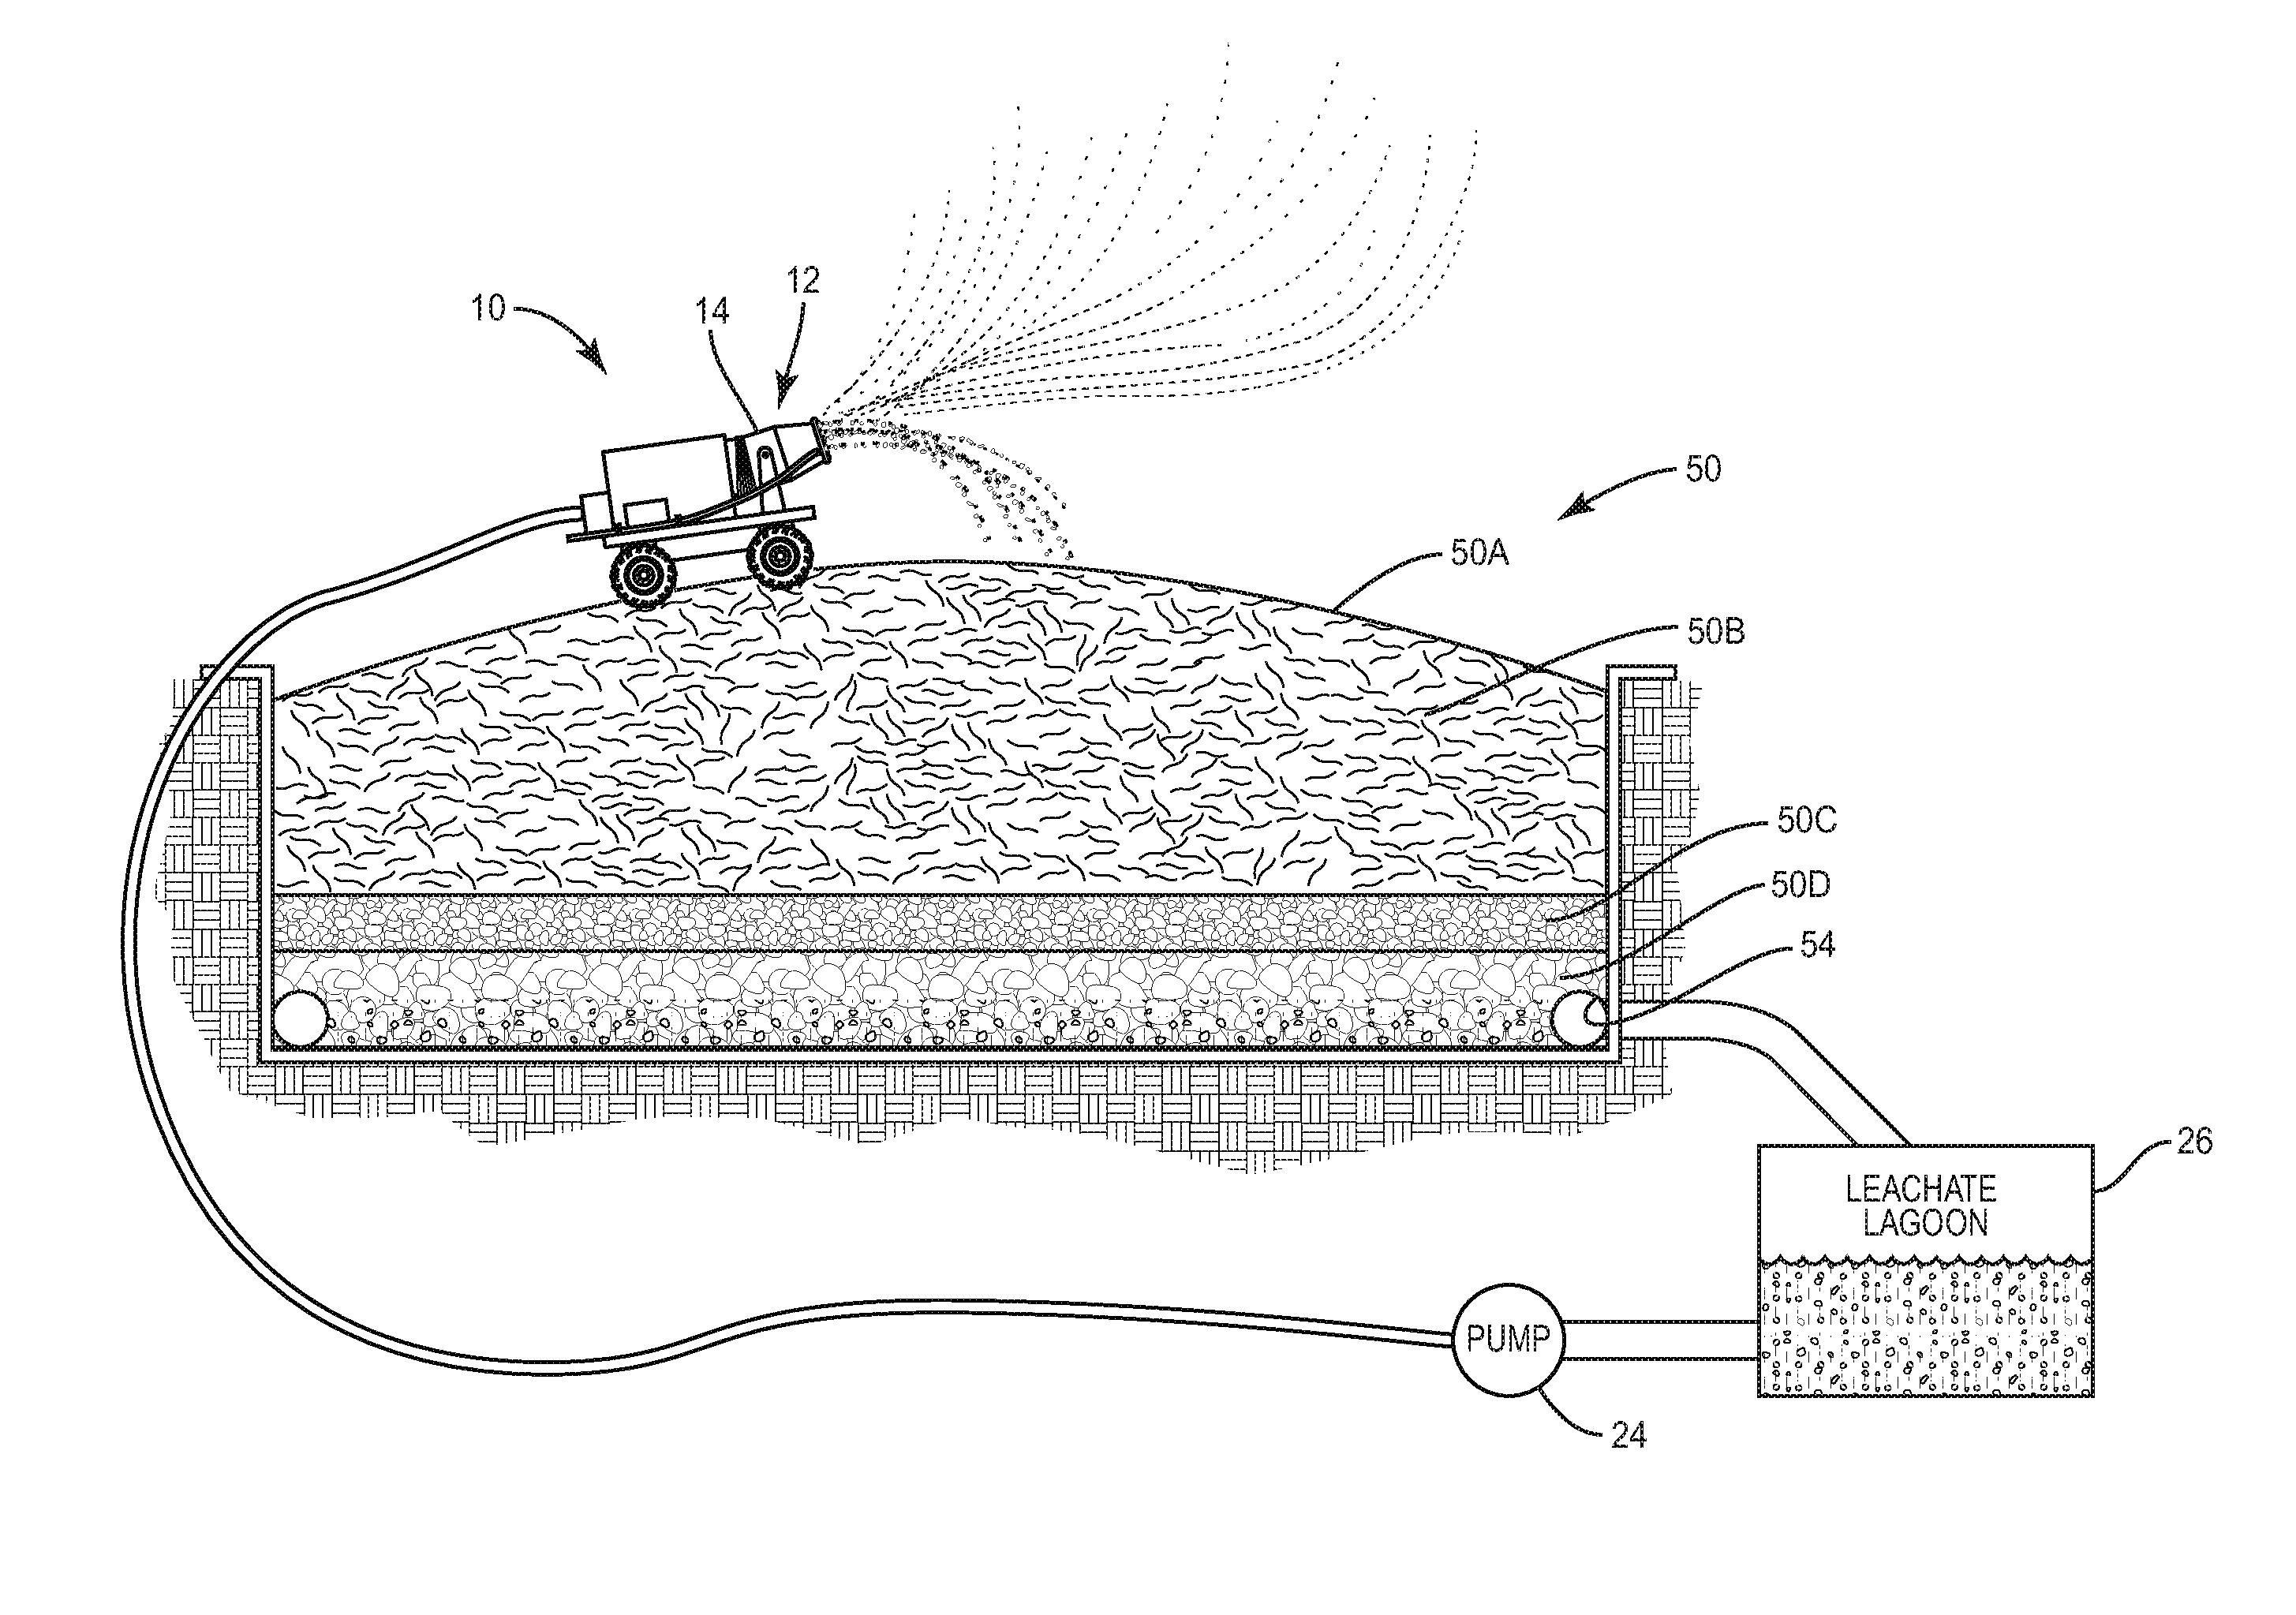 System and method for on site aerial dissemination and atmospheric disposal of all leachates and wastewaters